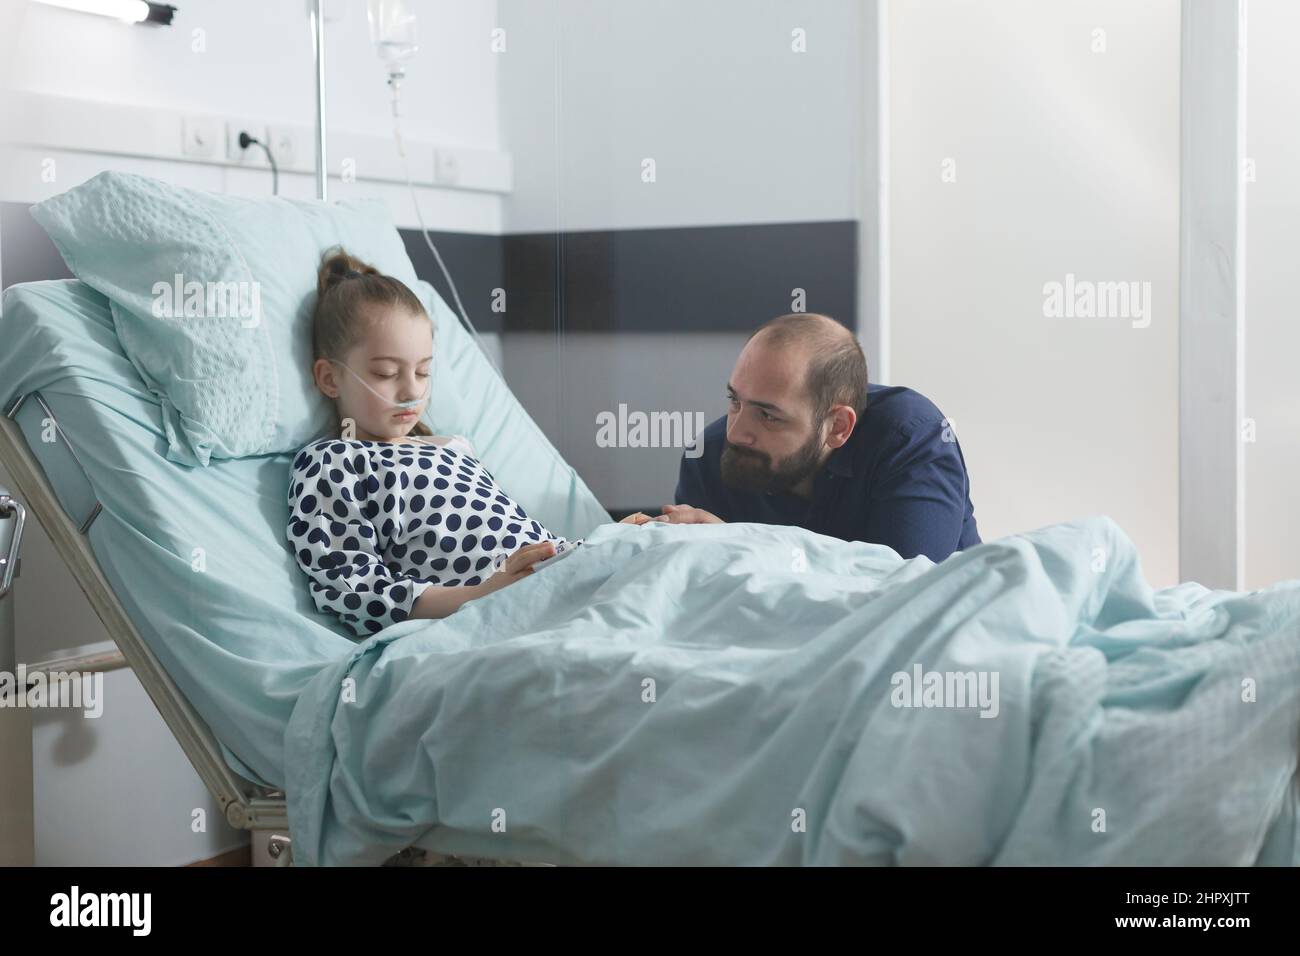 Worried sad uneasy father watching sick little daughter sleeping in hospital bed while in pediatric clinic patient room. Under treatment ill child resting while attentive parent taking care of her. Stock Photo